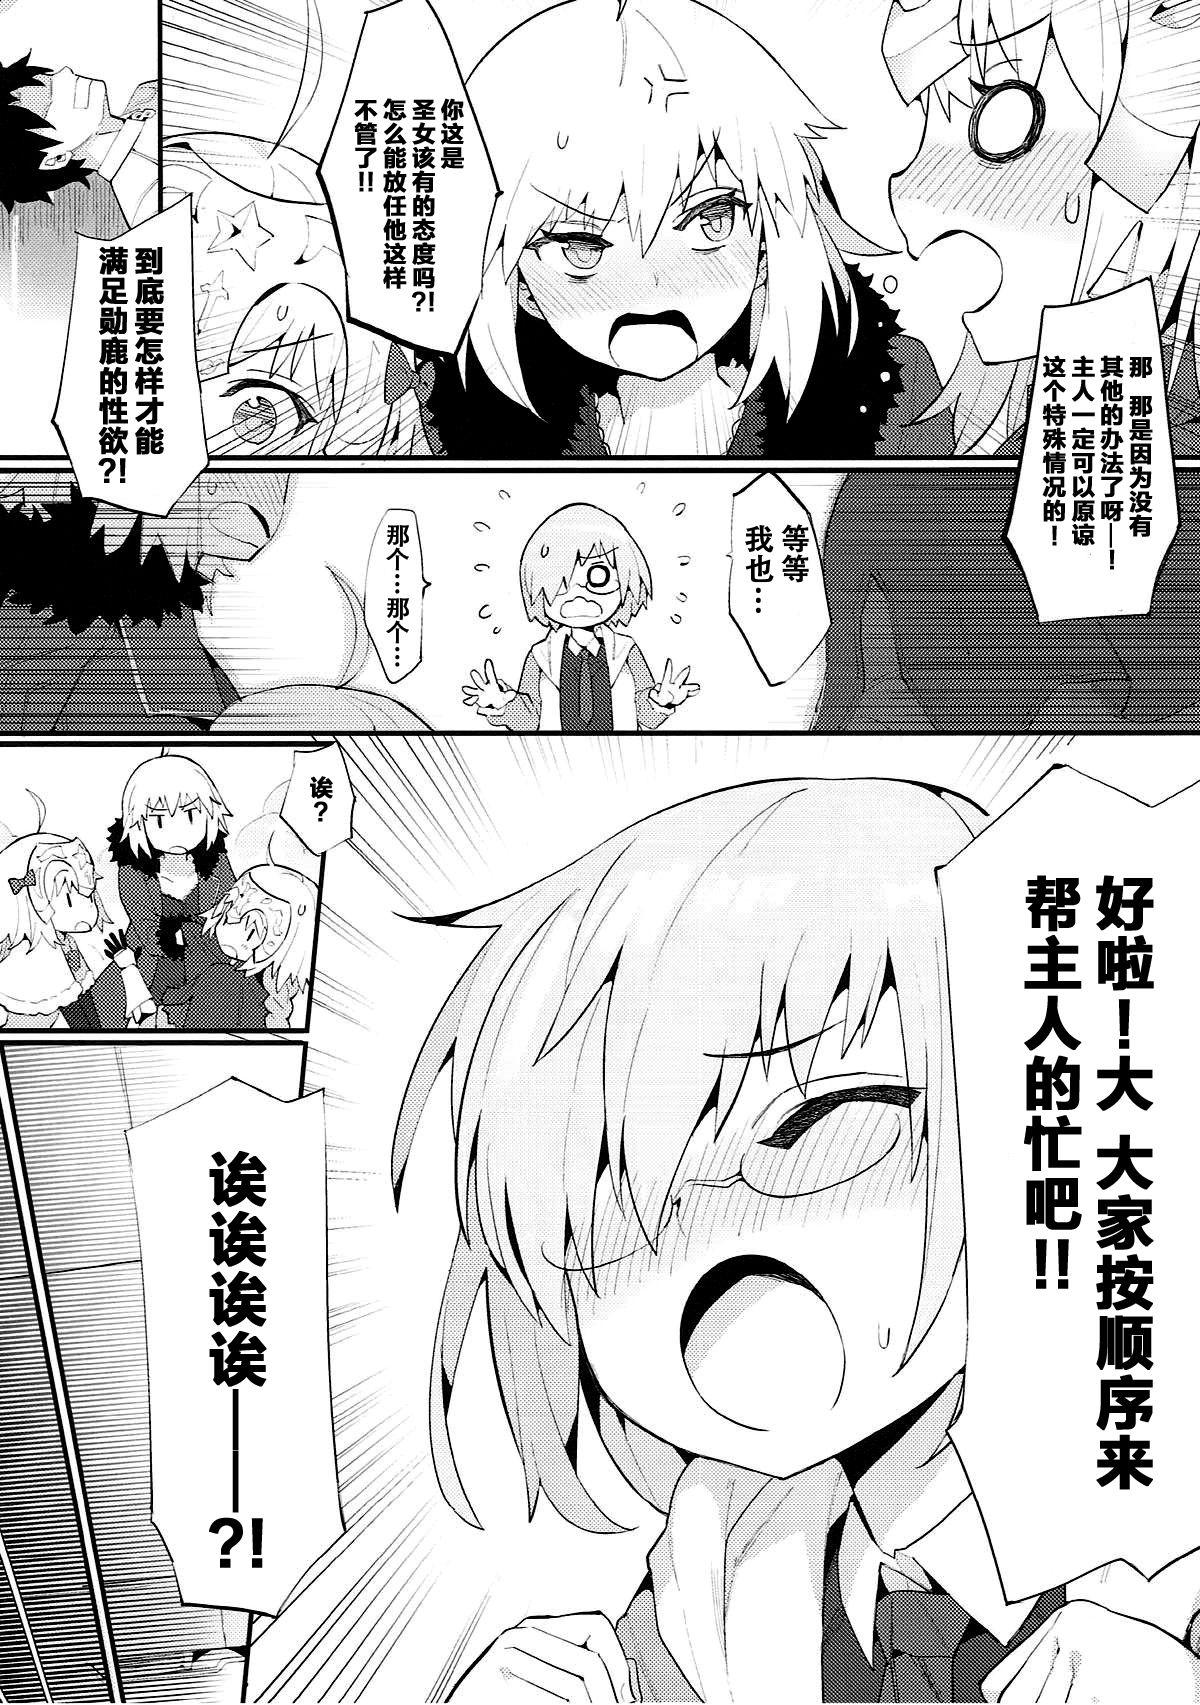 Home Chaldea Shiki Seiyoku Shori System - Fate grand order Point Of View - Page 6